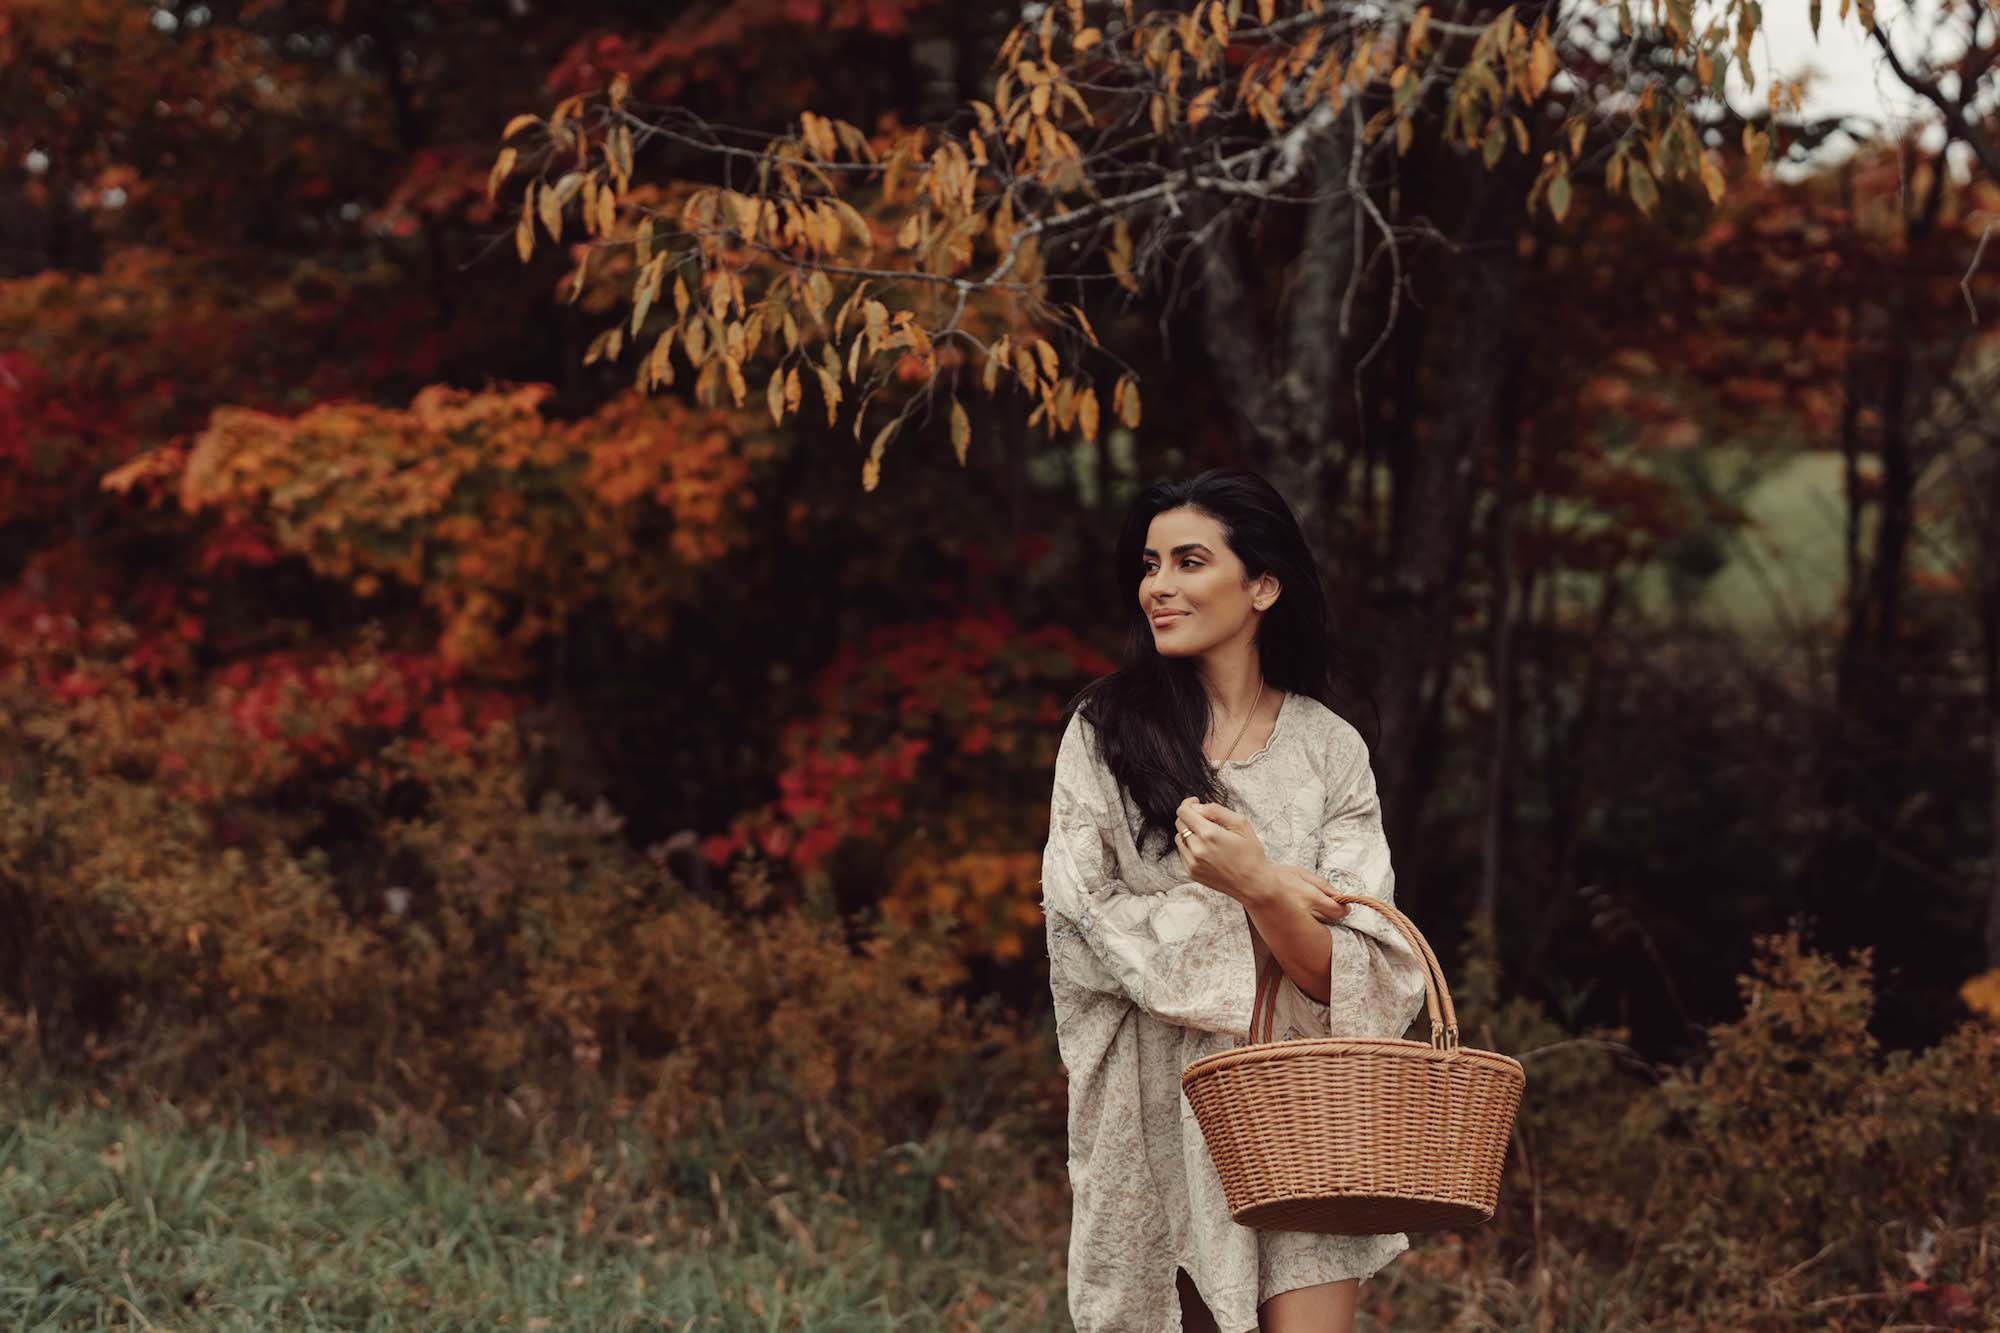 The Best Advice Sazan Can Give About Self-Love